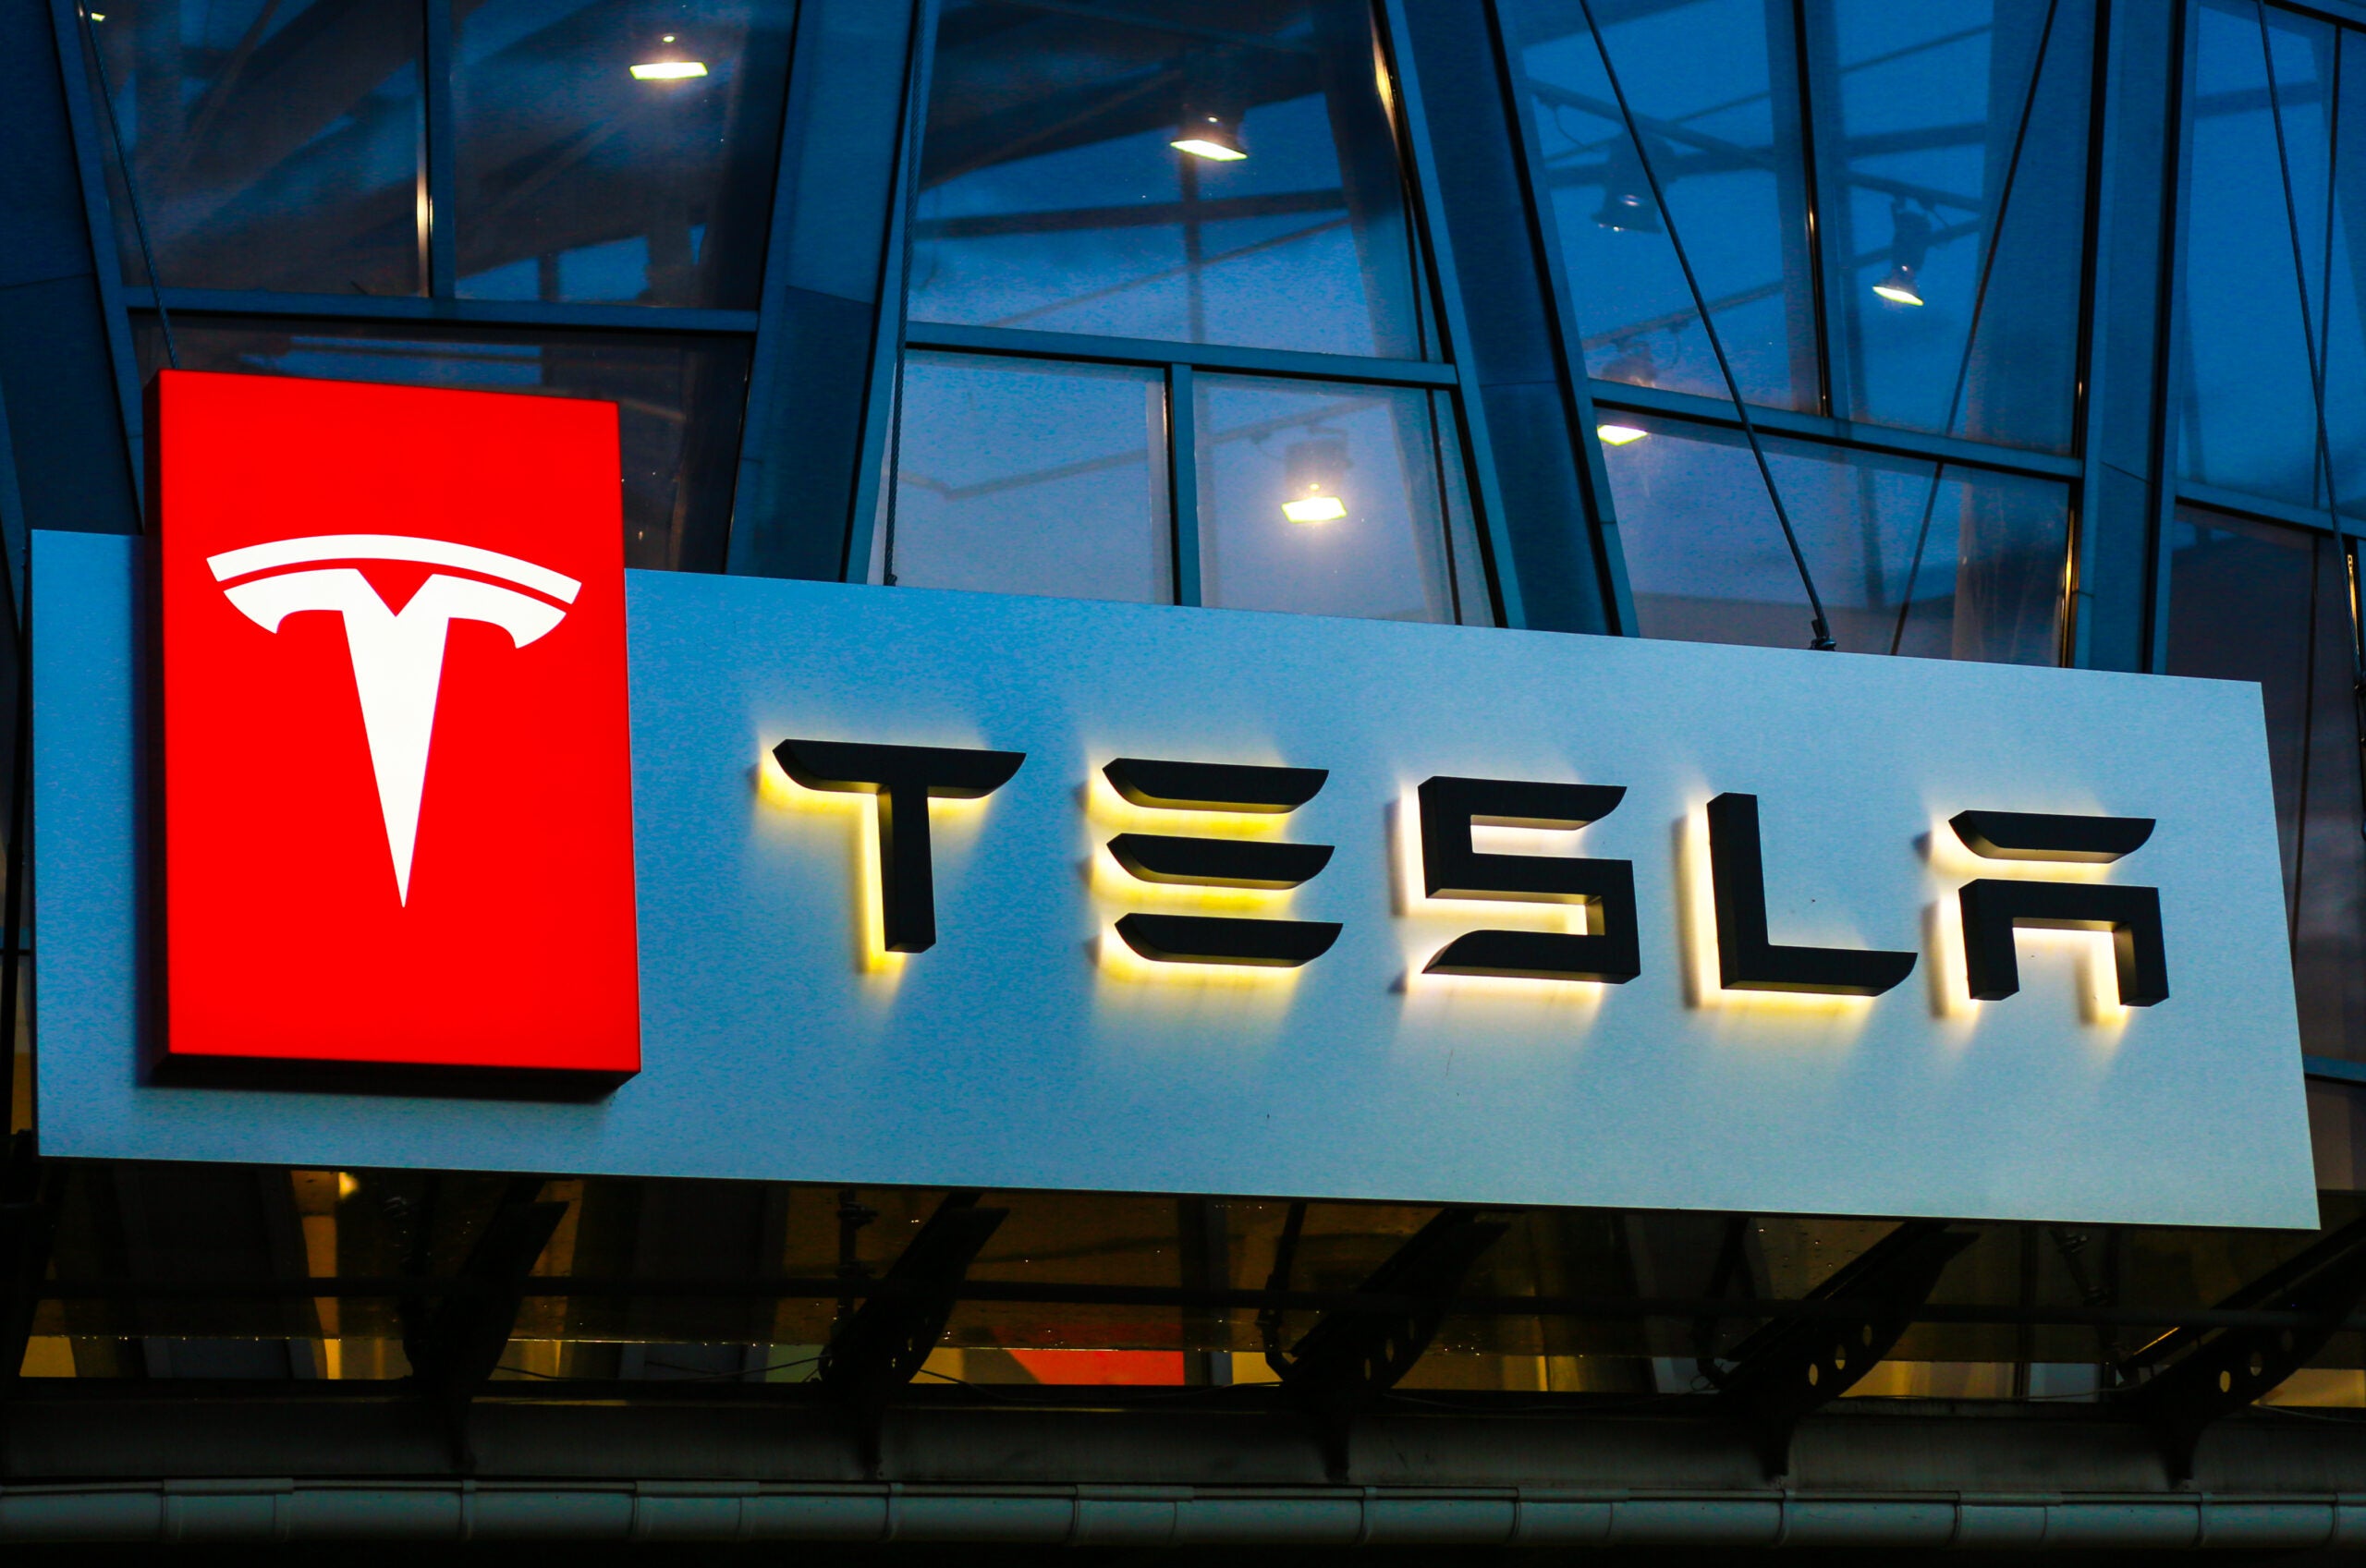 Tesla is the best company when it comes to semiconductors and weathering disruptions, analys